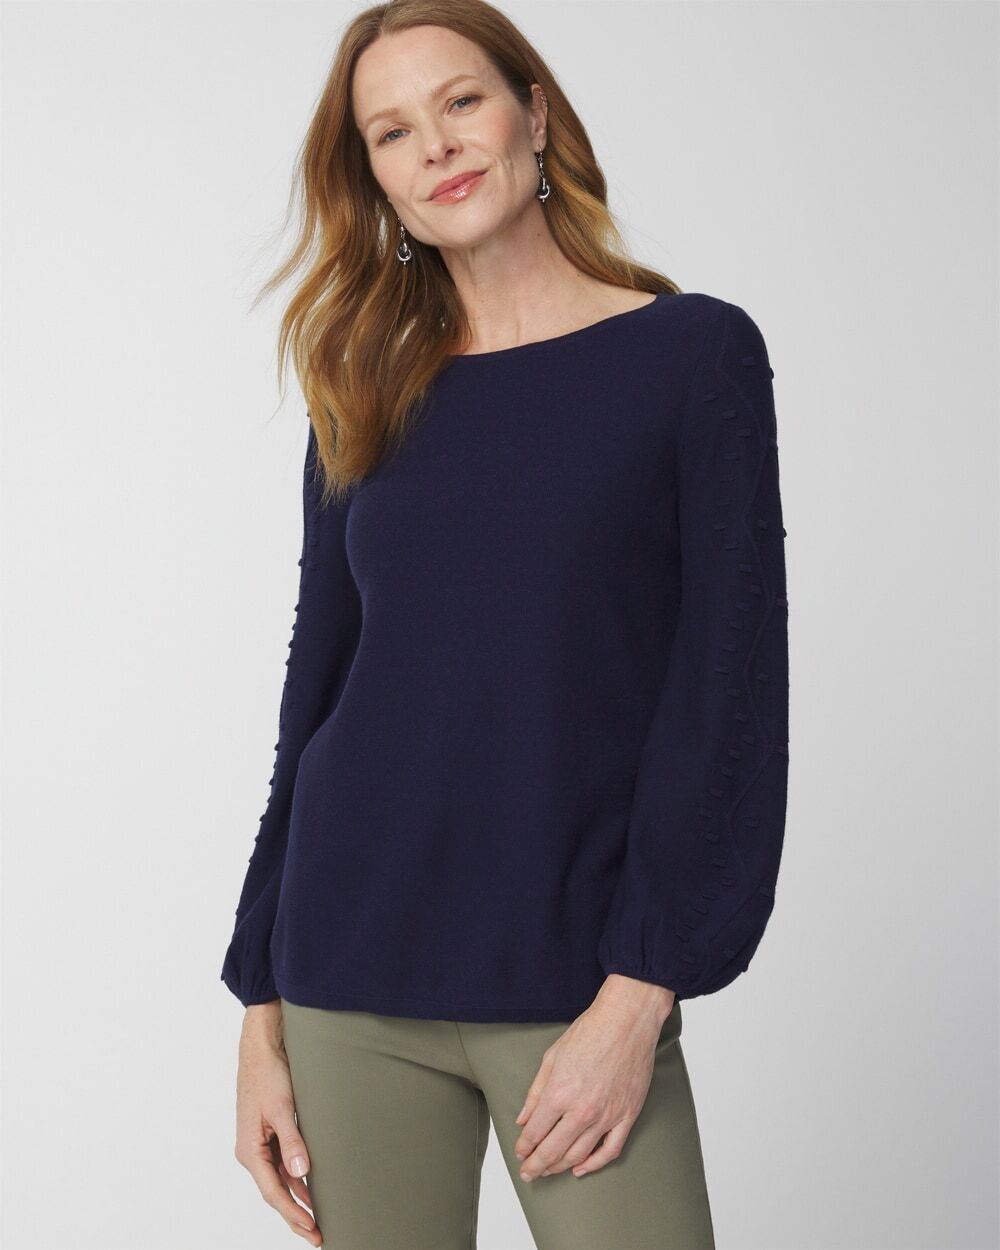 Chico's Off The Rack Women's Bubble Sweater in Midnight Dark Blue Size Medium   Chico's Outlet, Clearance Women's Clothing - Midnight Dark Blue - Women - Size: Medium